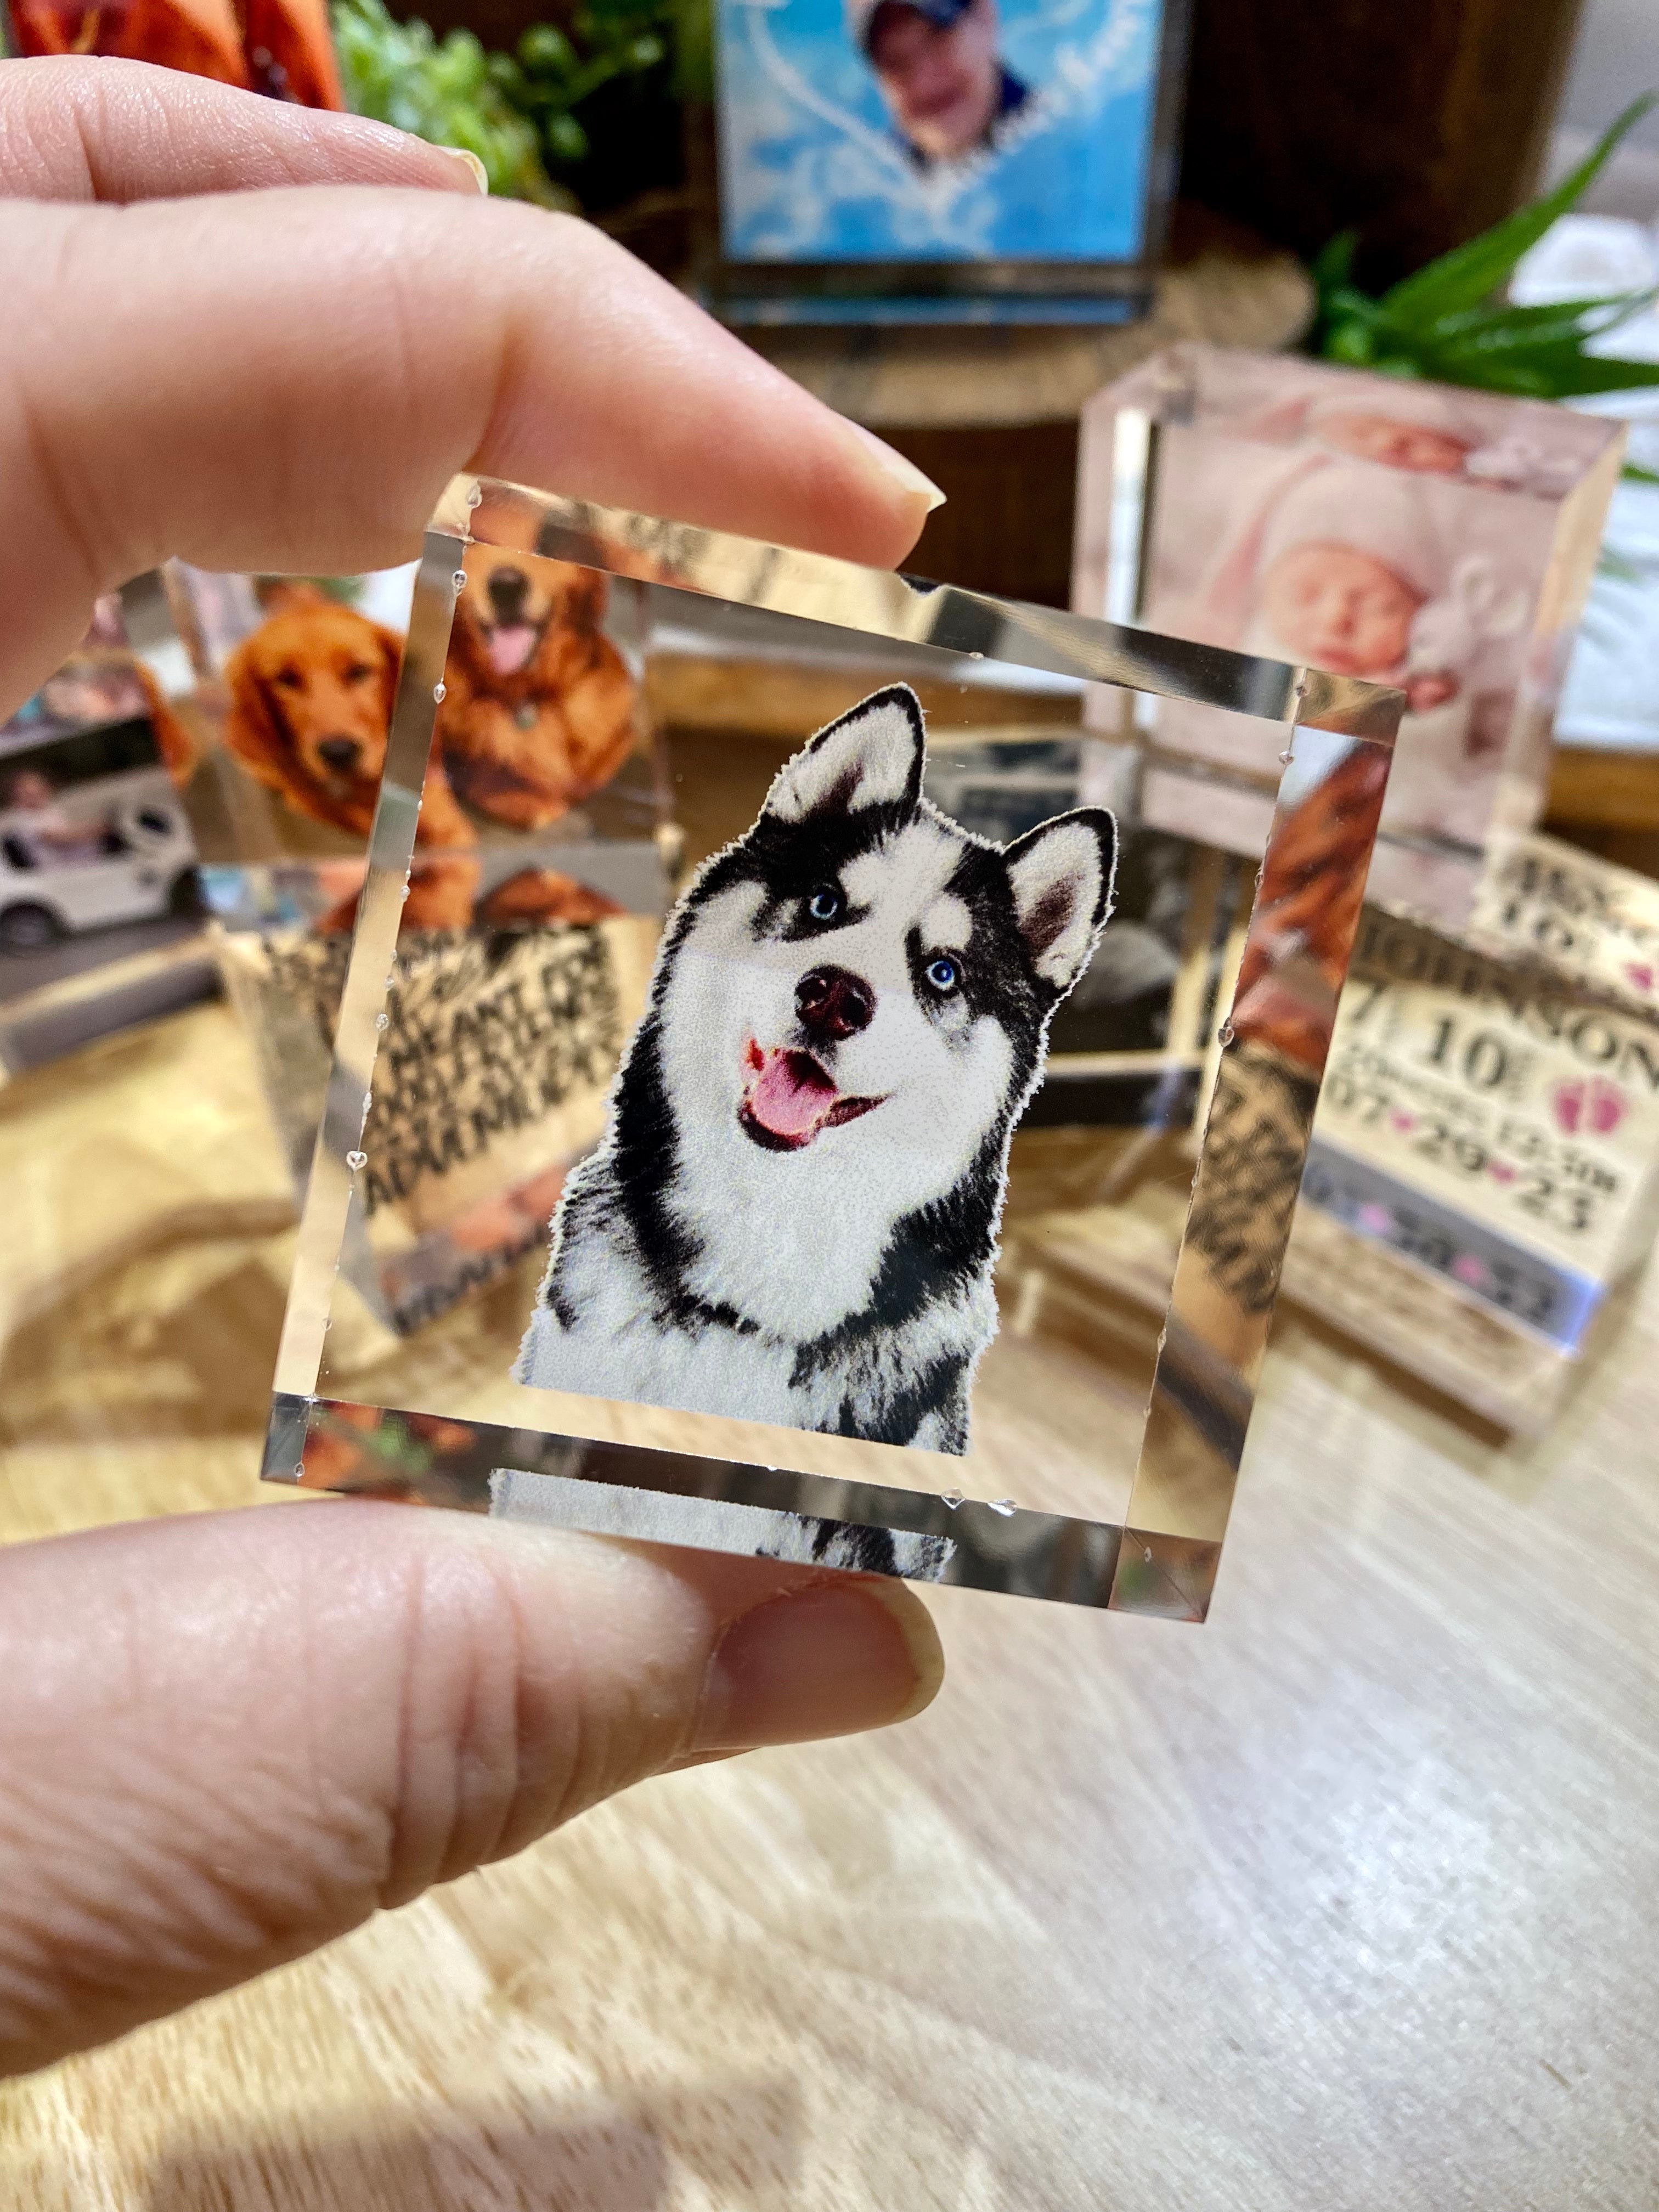 Wood style Pet memorial gift with picture and customizable name and date